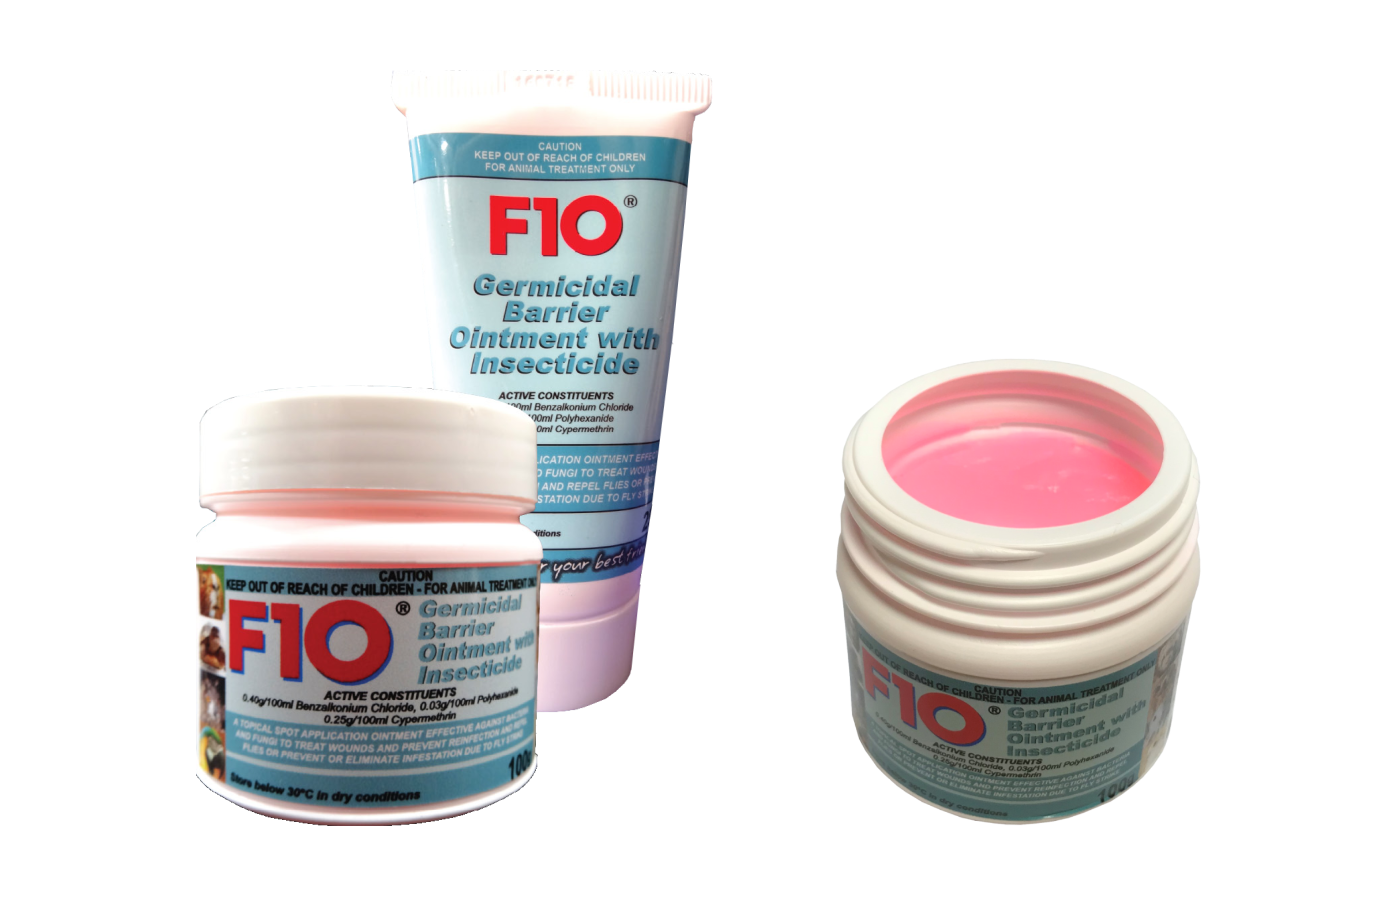 Tubs of F10 Germicidal Barrier Ointment with Insecticide